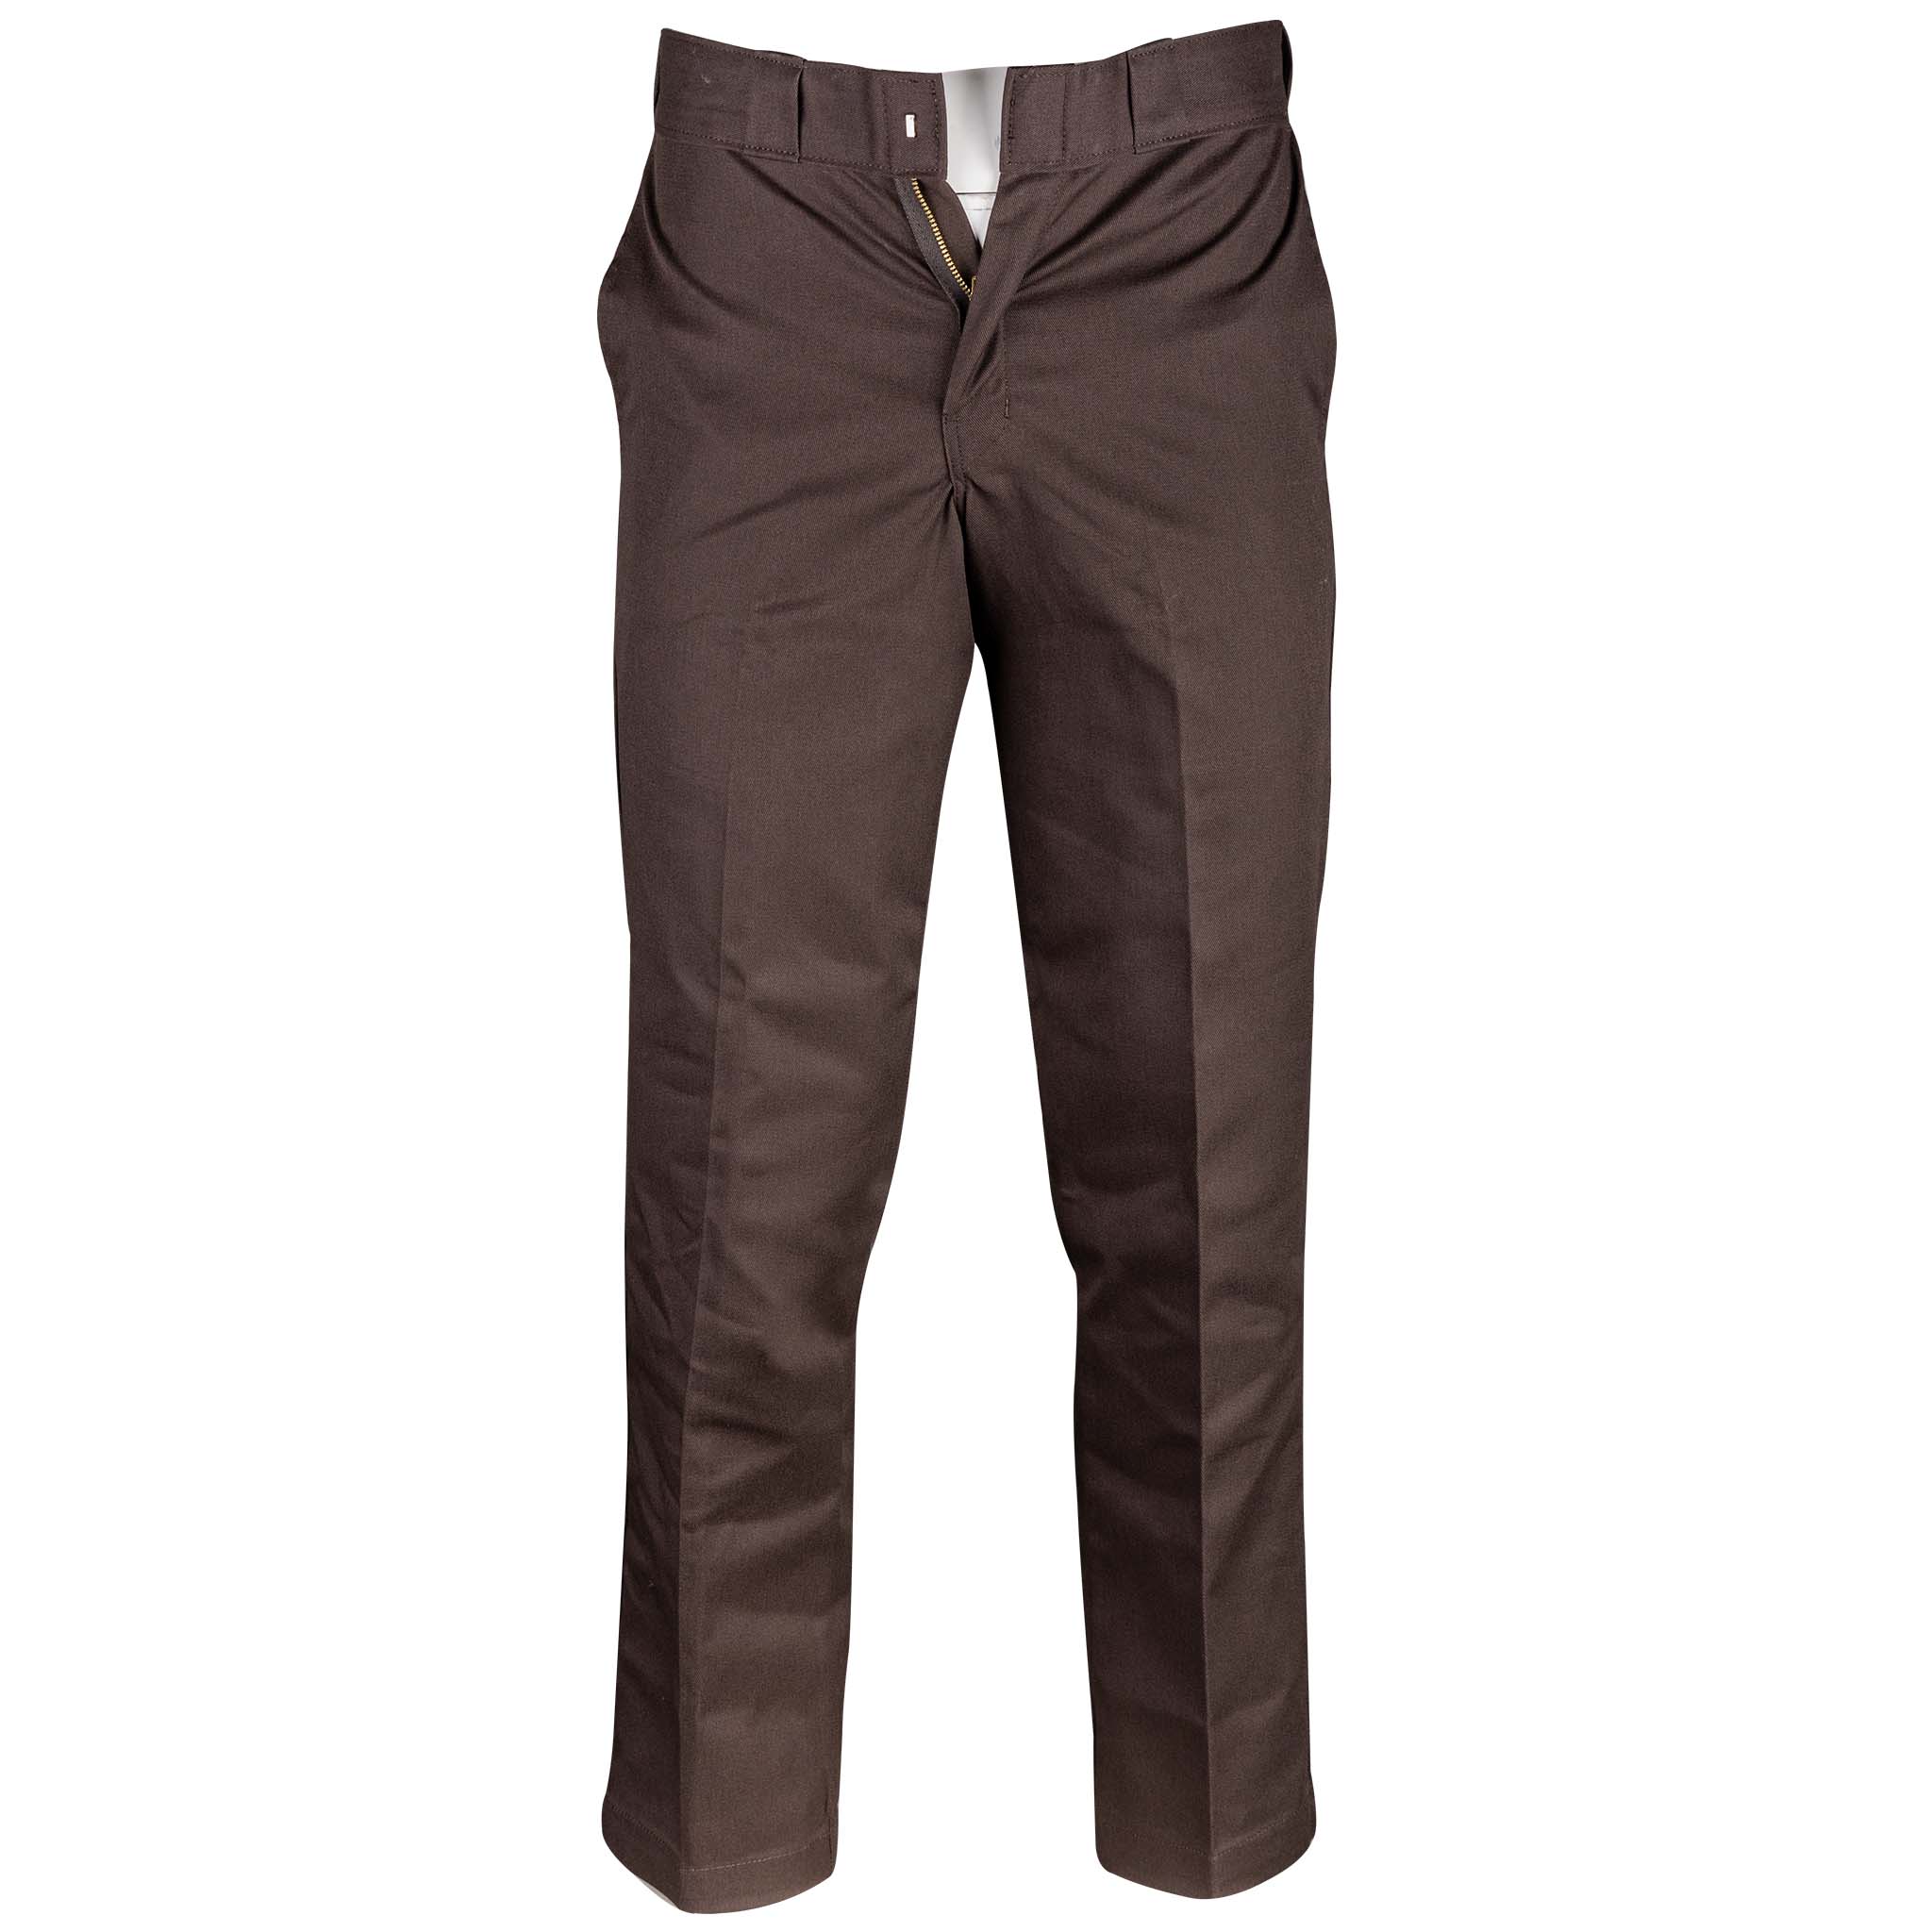 KOLMAKOV Mens Slim Fit Nylon Slim Fit Work Trousers For Formal Office Wear  Stretchy, Comfortable, And Slim Fit From Charle, $26.92 | DHgate.Com